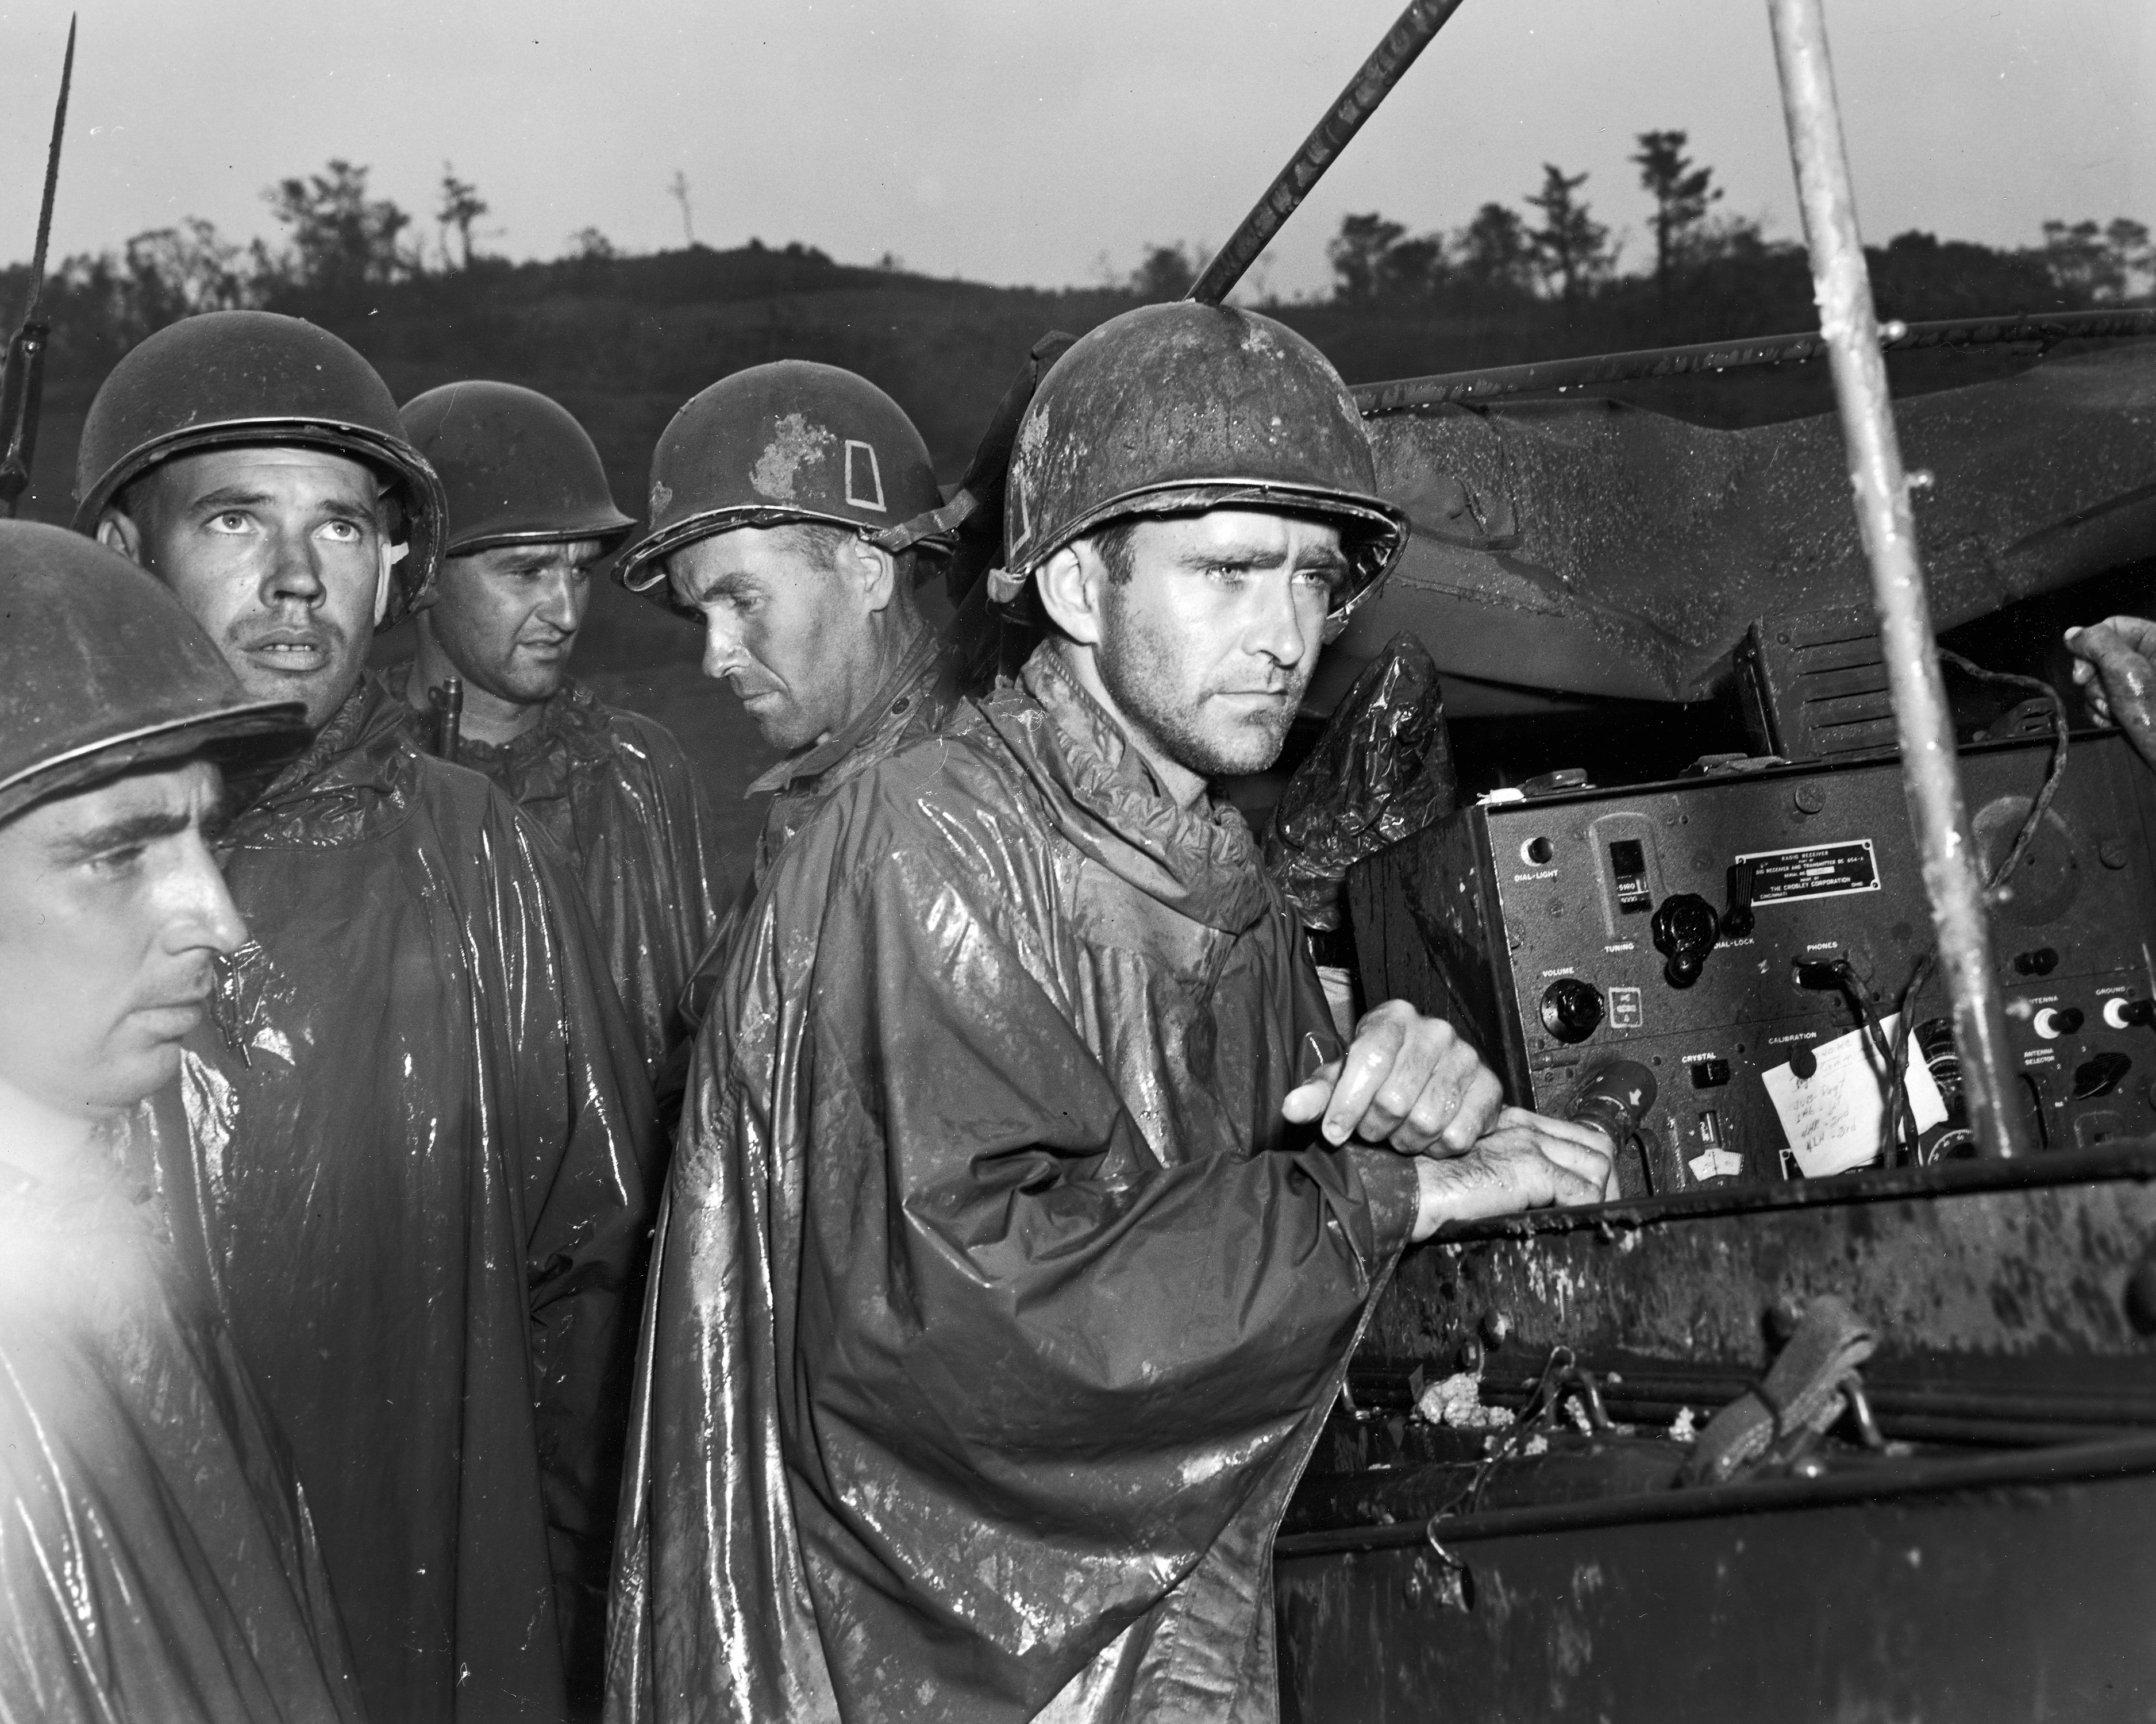 Grim-faced American soldiers fighting on Okinawa listen to a radio broadcast of the surrender of Germany and the end of WWII in Europe, May 1945.